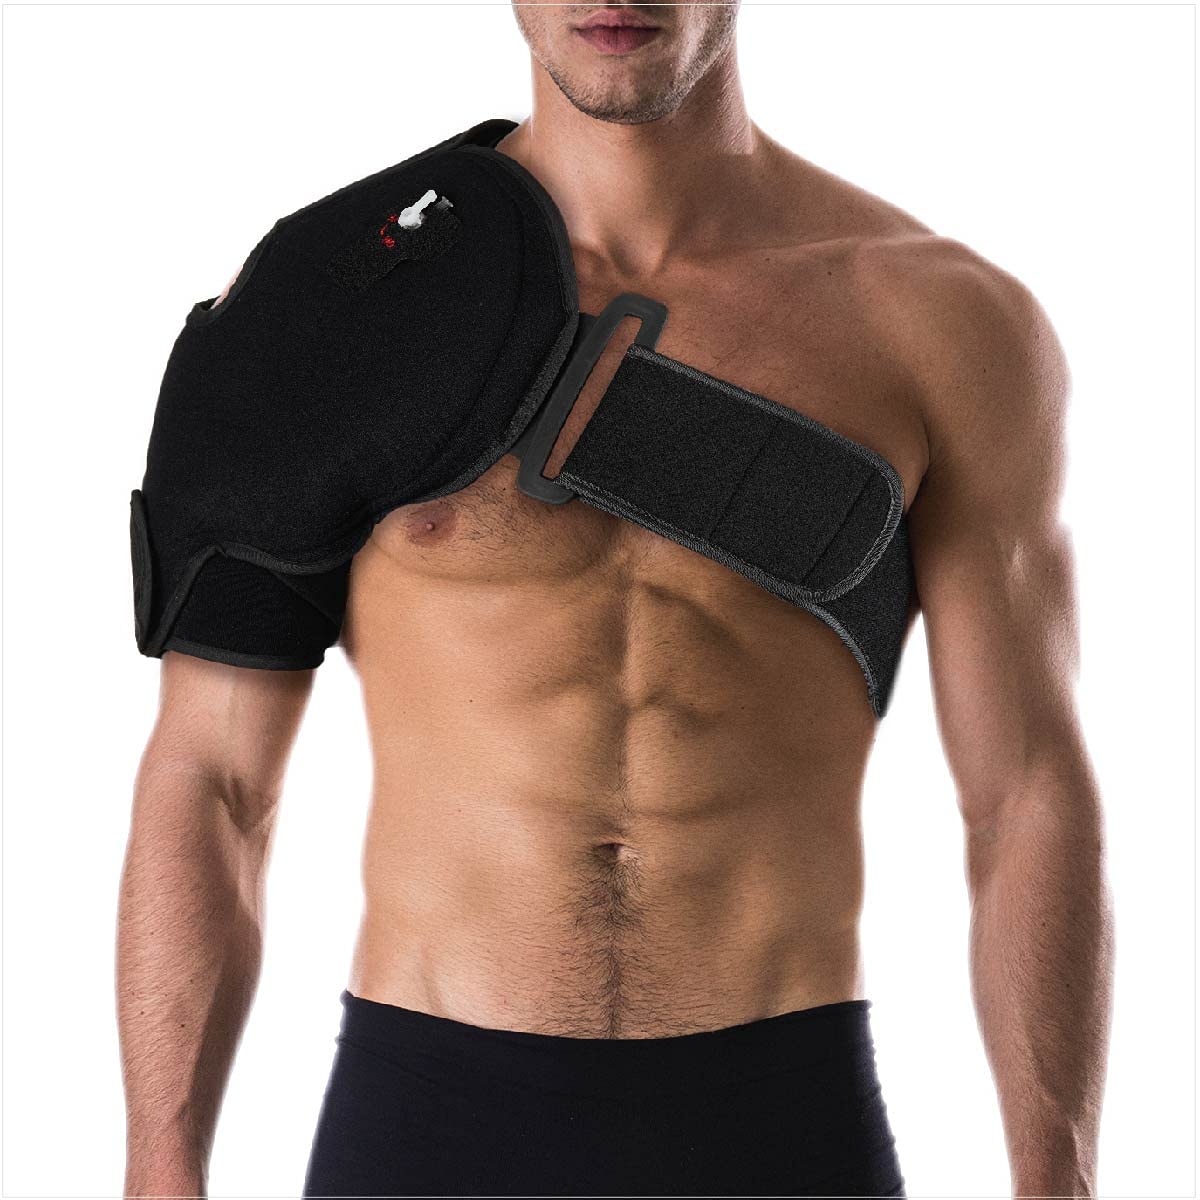 Shoulder Support for Pain, Posture Correction Hand Support for Gym